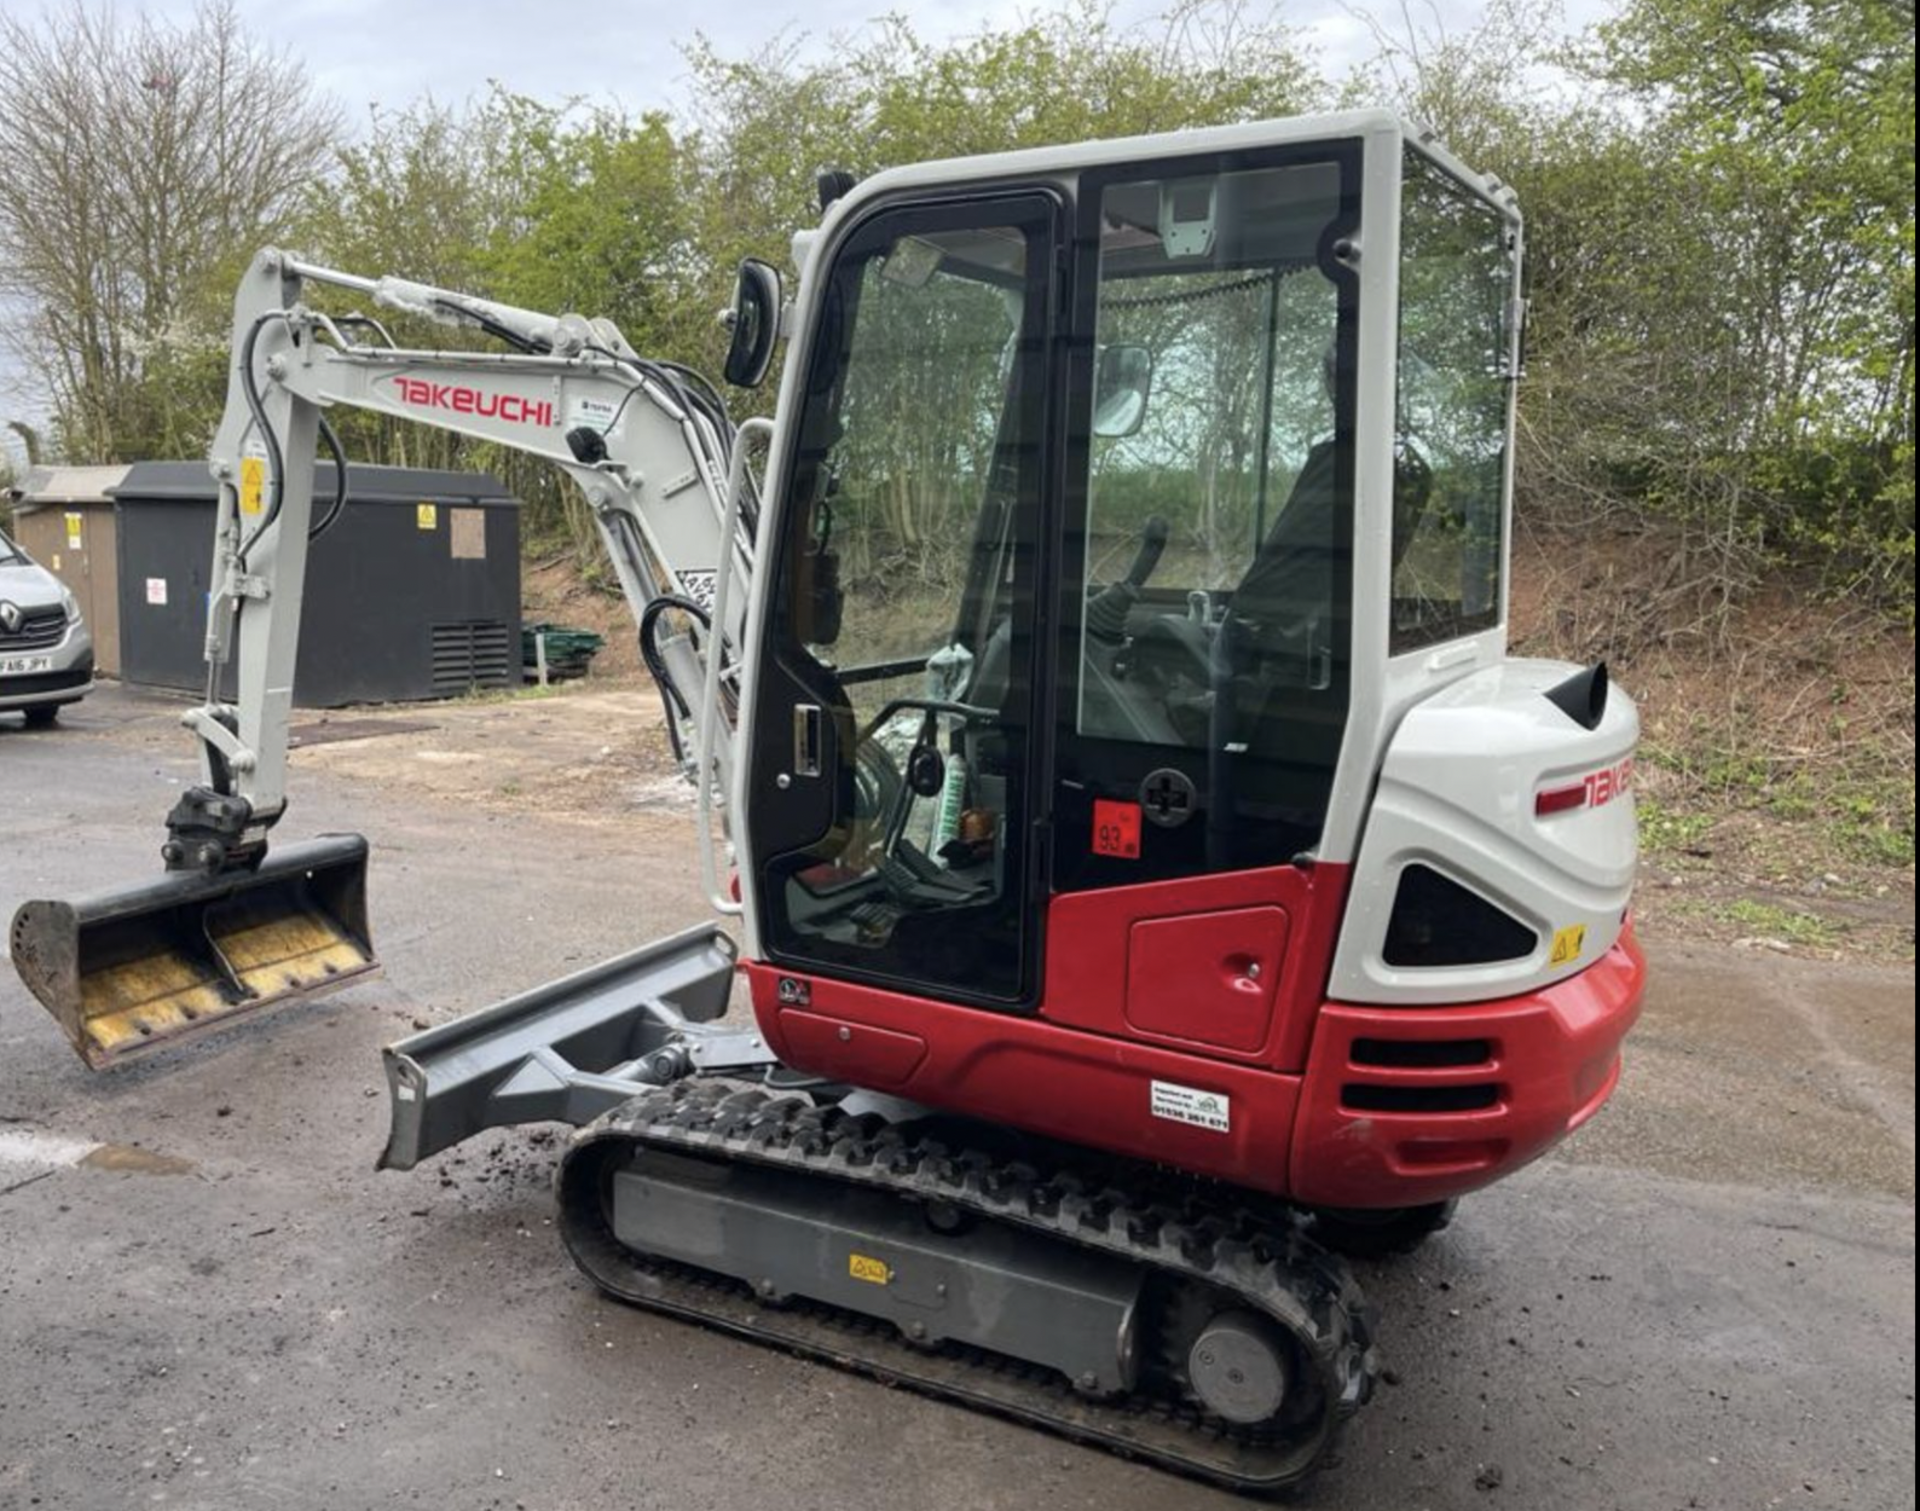 2020 TAKEUCHI TB230 3 TON EXCAVATOR 27HRS ONLY WARRANTED HOURS - AS NEW C/W HYDRAULIC QUICK HITCH - Image 2 of 13